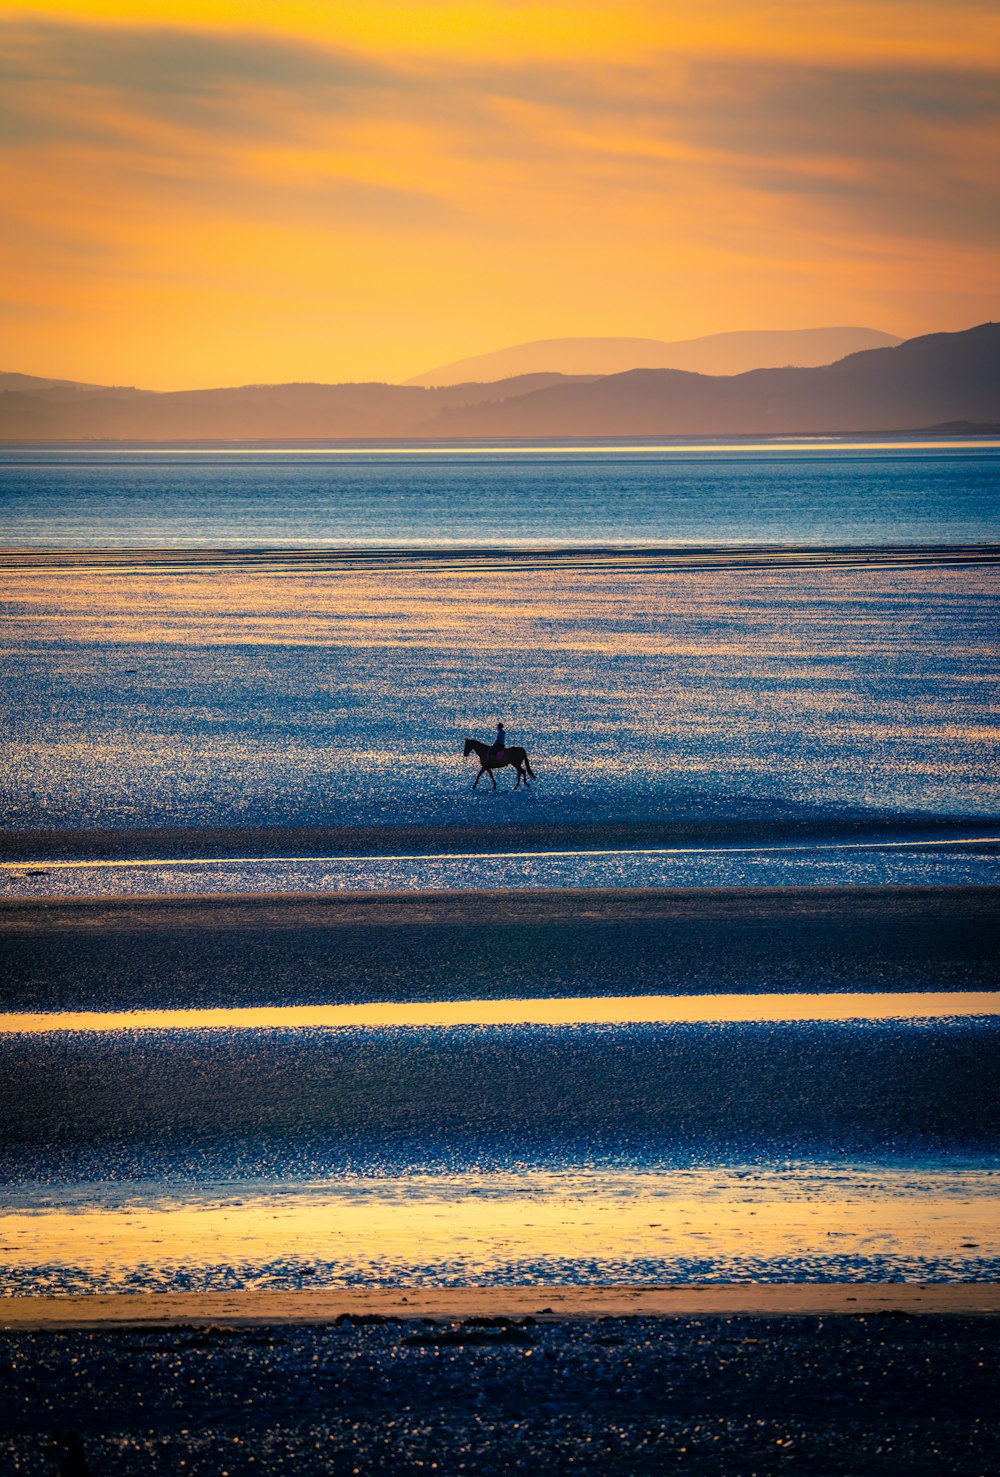 a person riding a horse on the beach at sunset